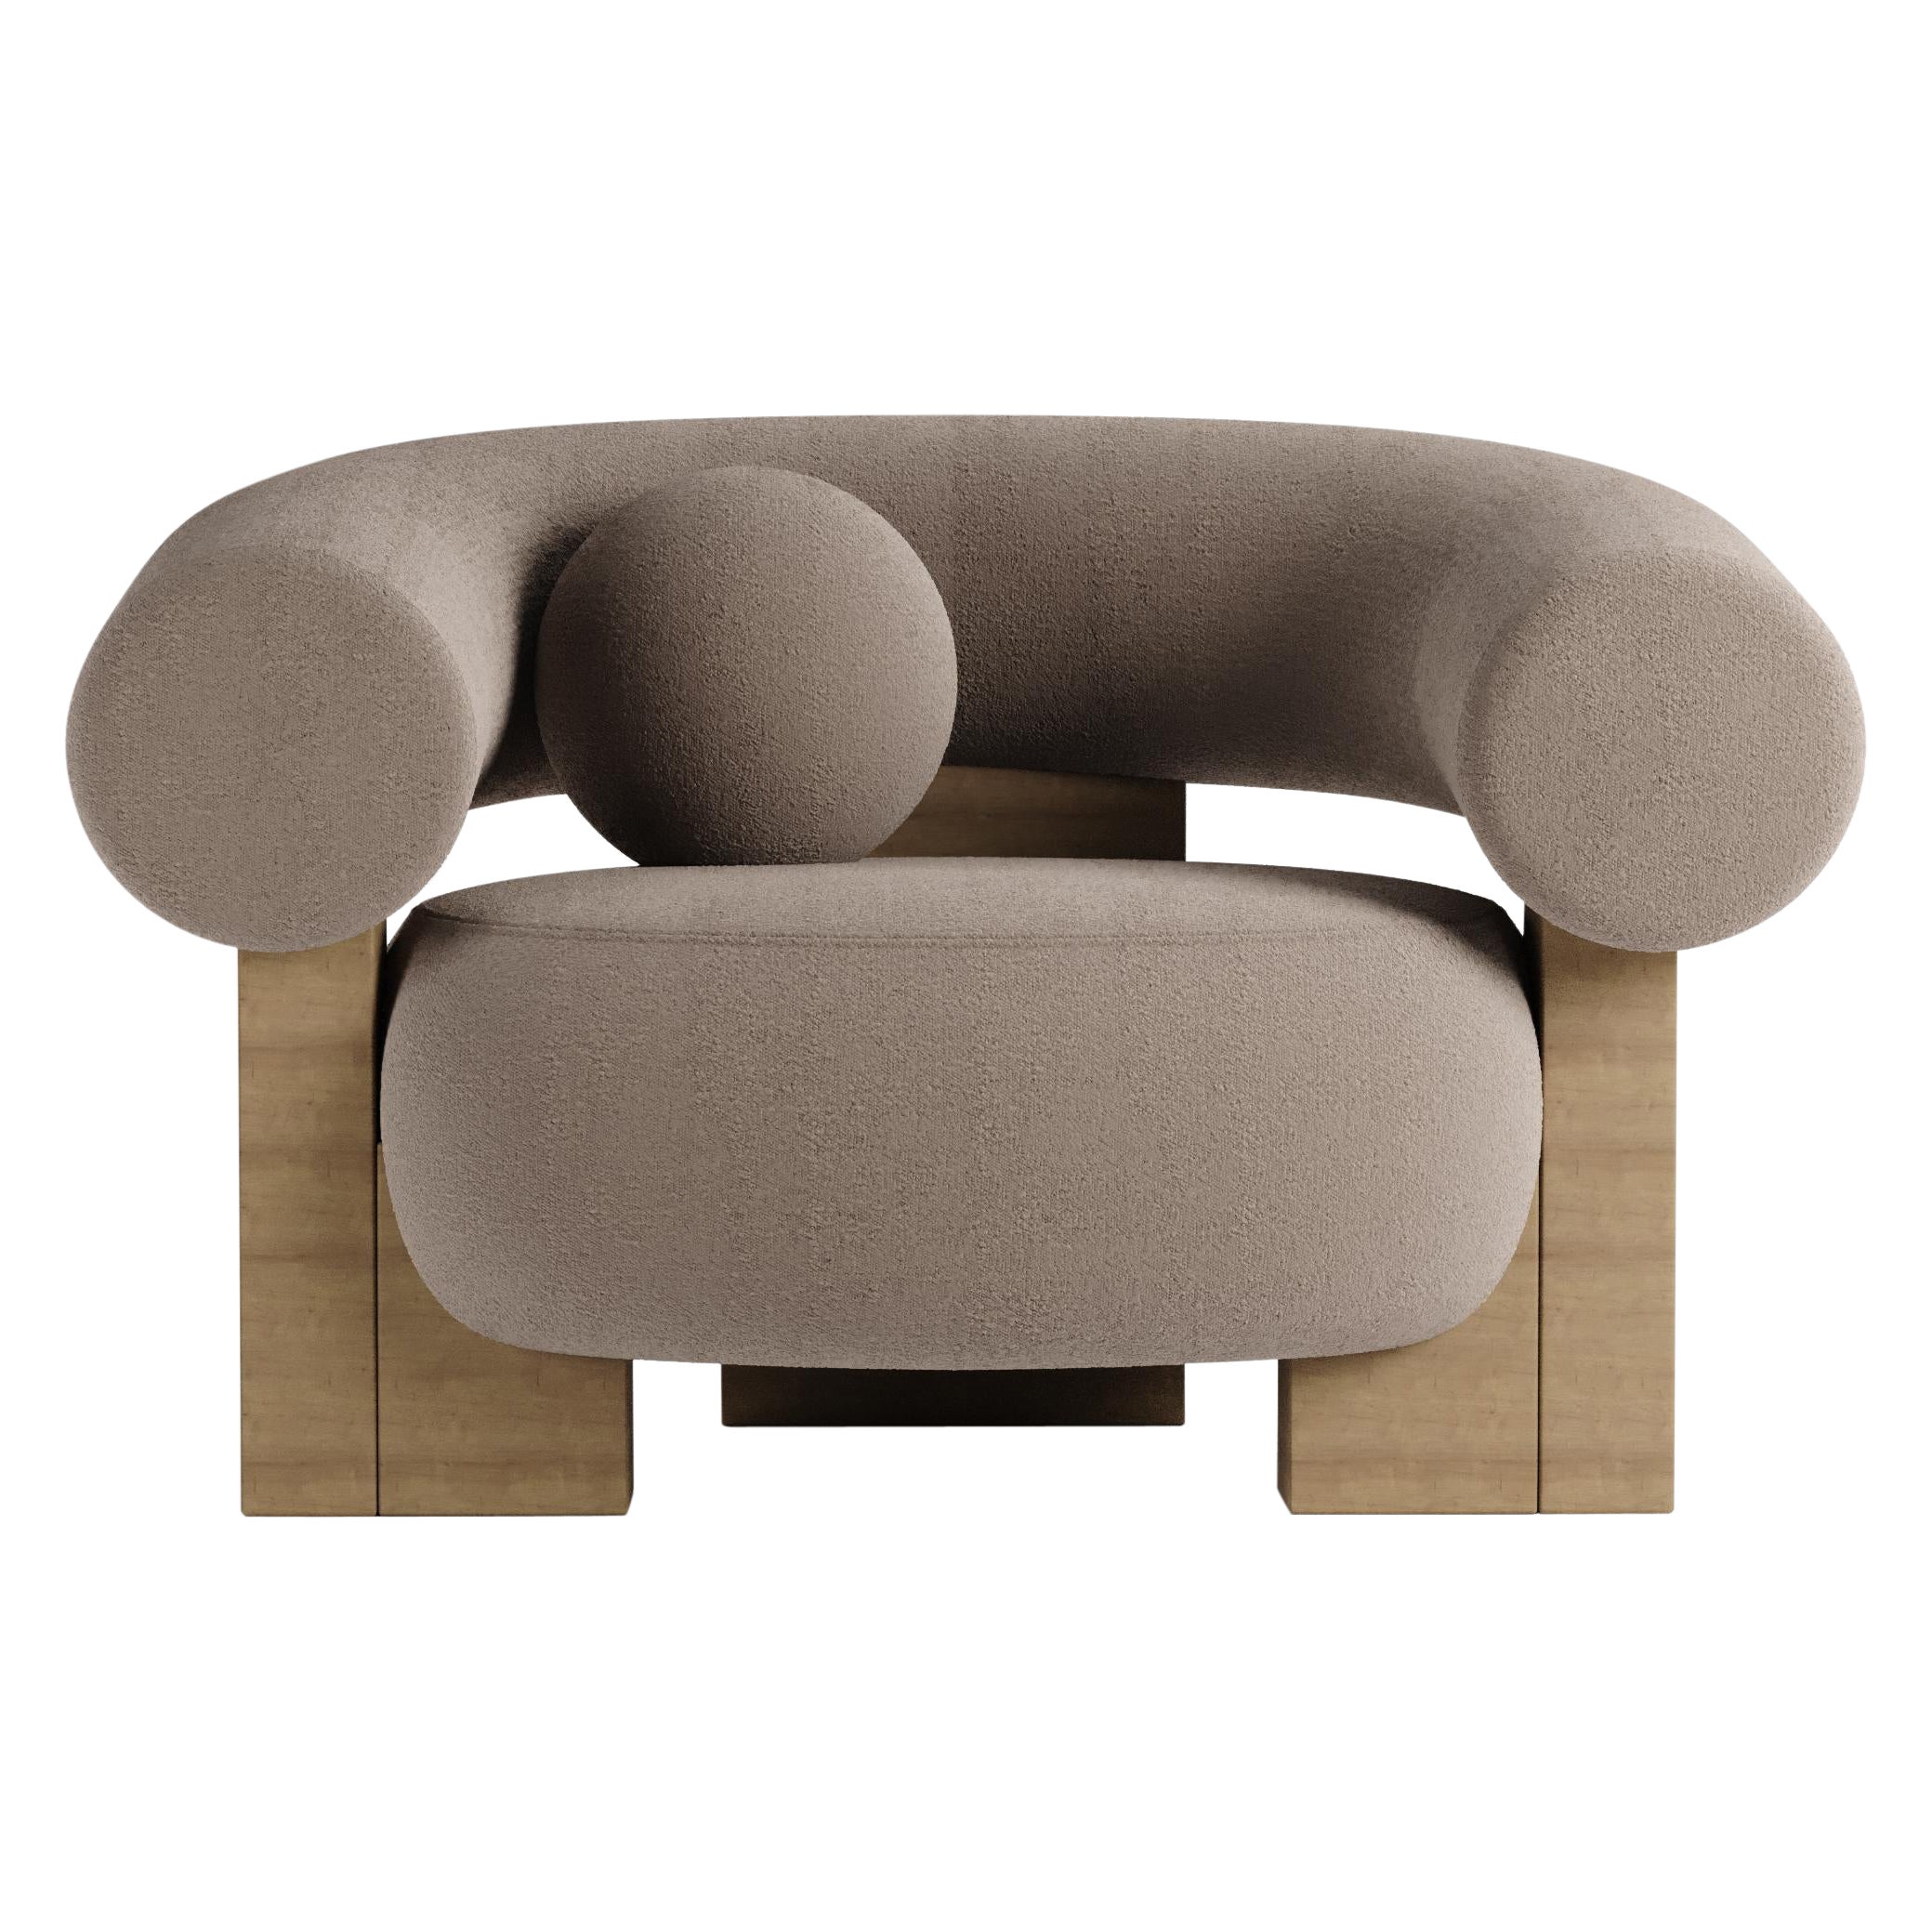 Contemporary Modern Cassette Armchair in Taupe Boucle, Collector